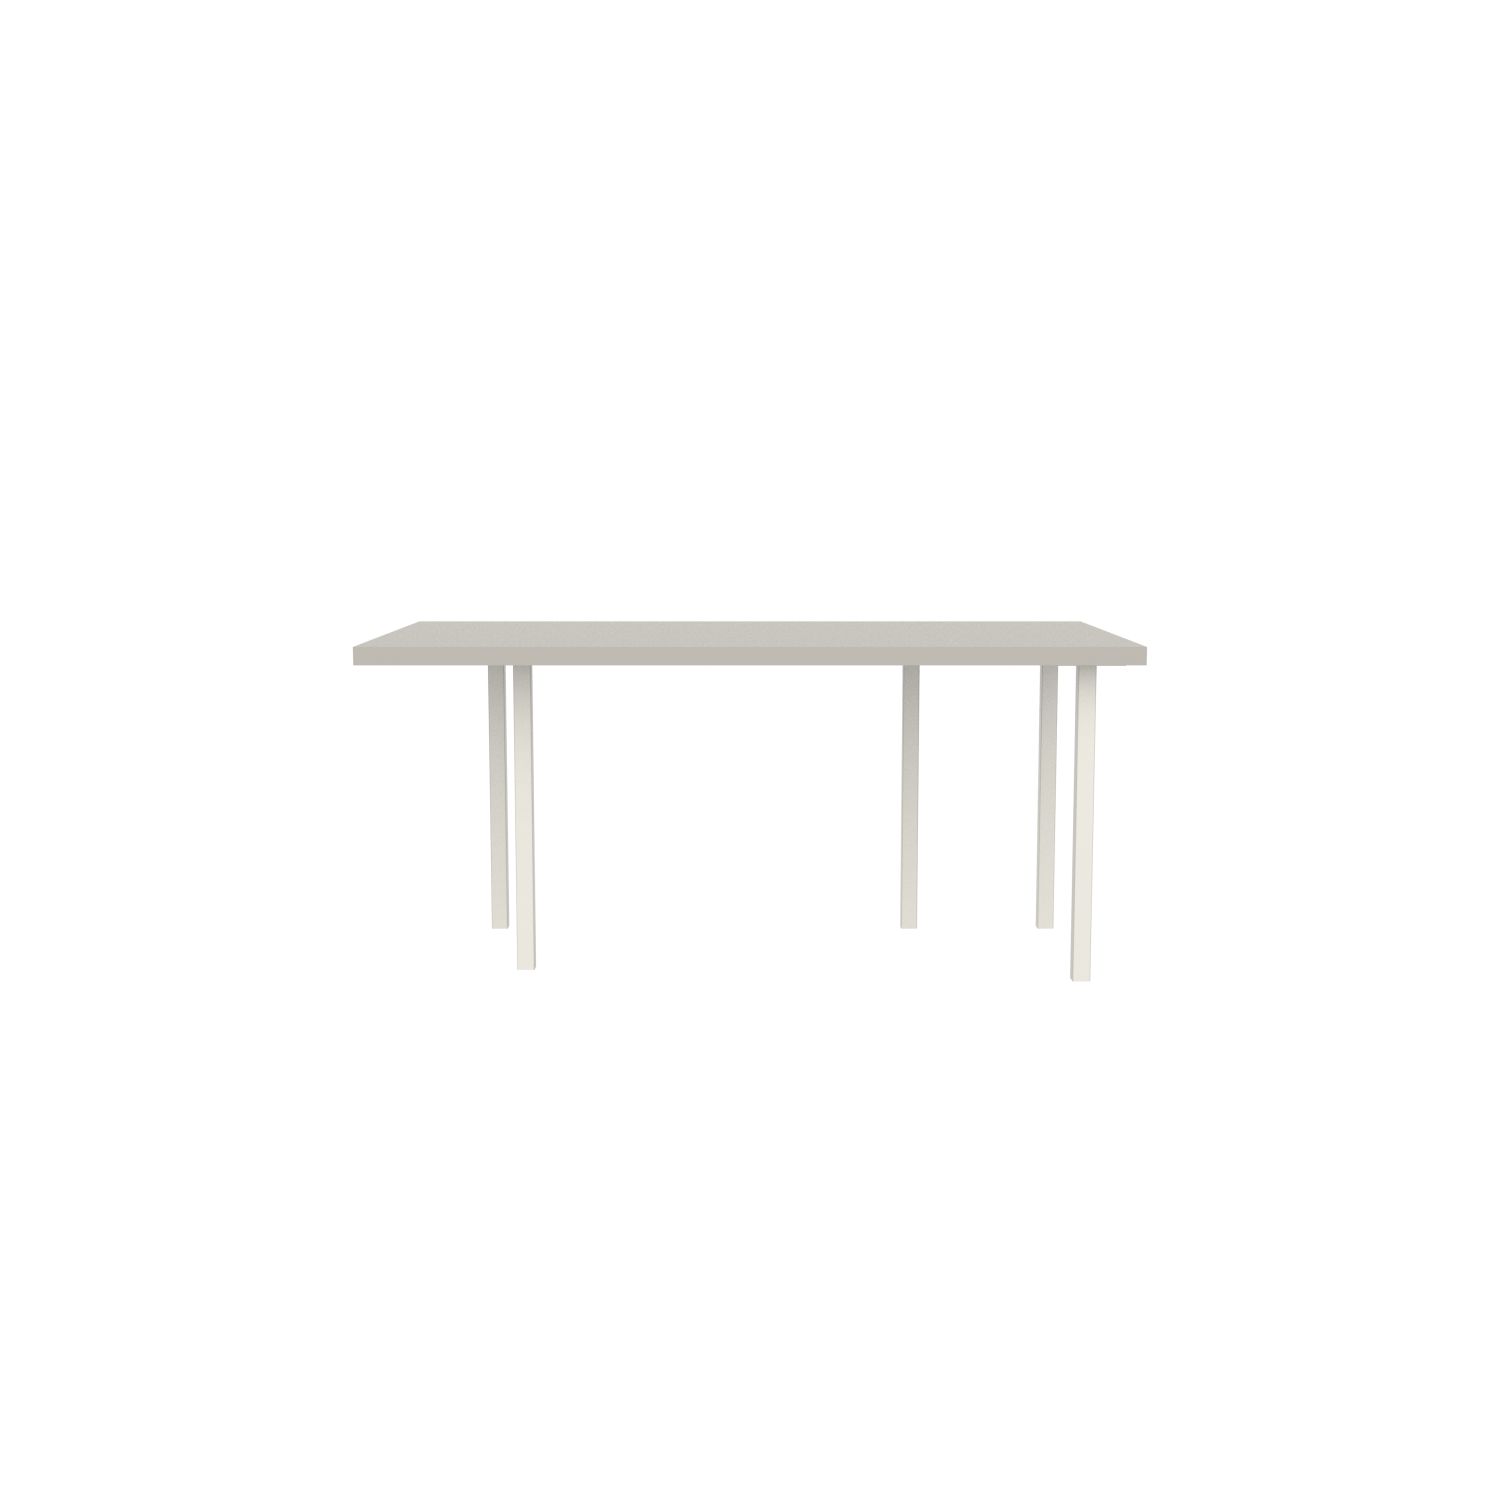 lensvelt bbrand table five fixed heigt 915x172 hpl white 50 mm price level 1 white ral9010